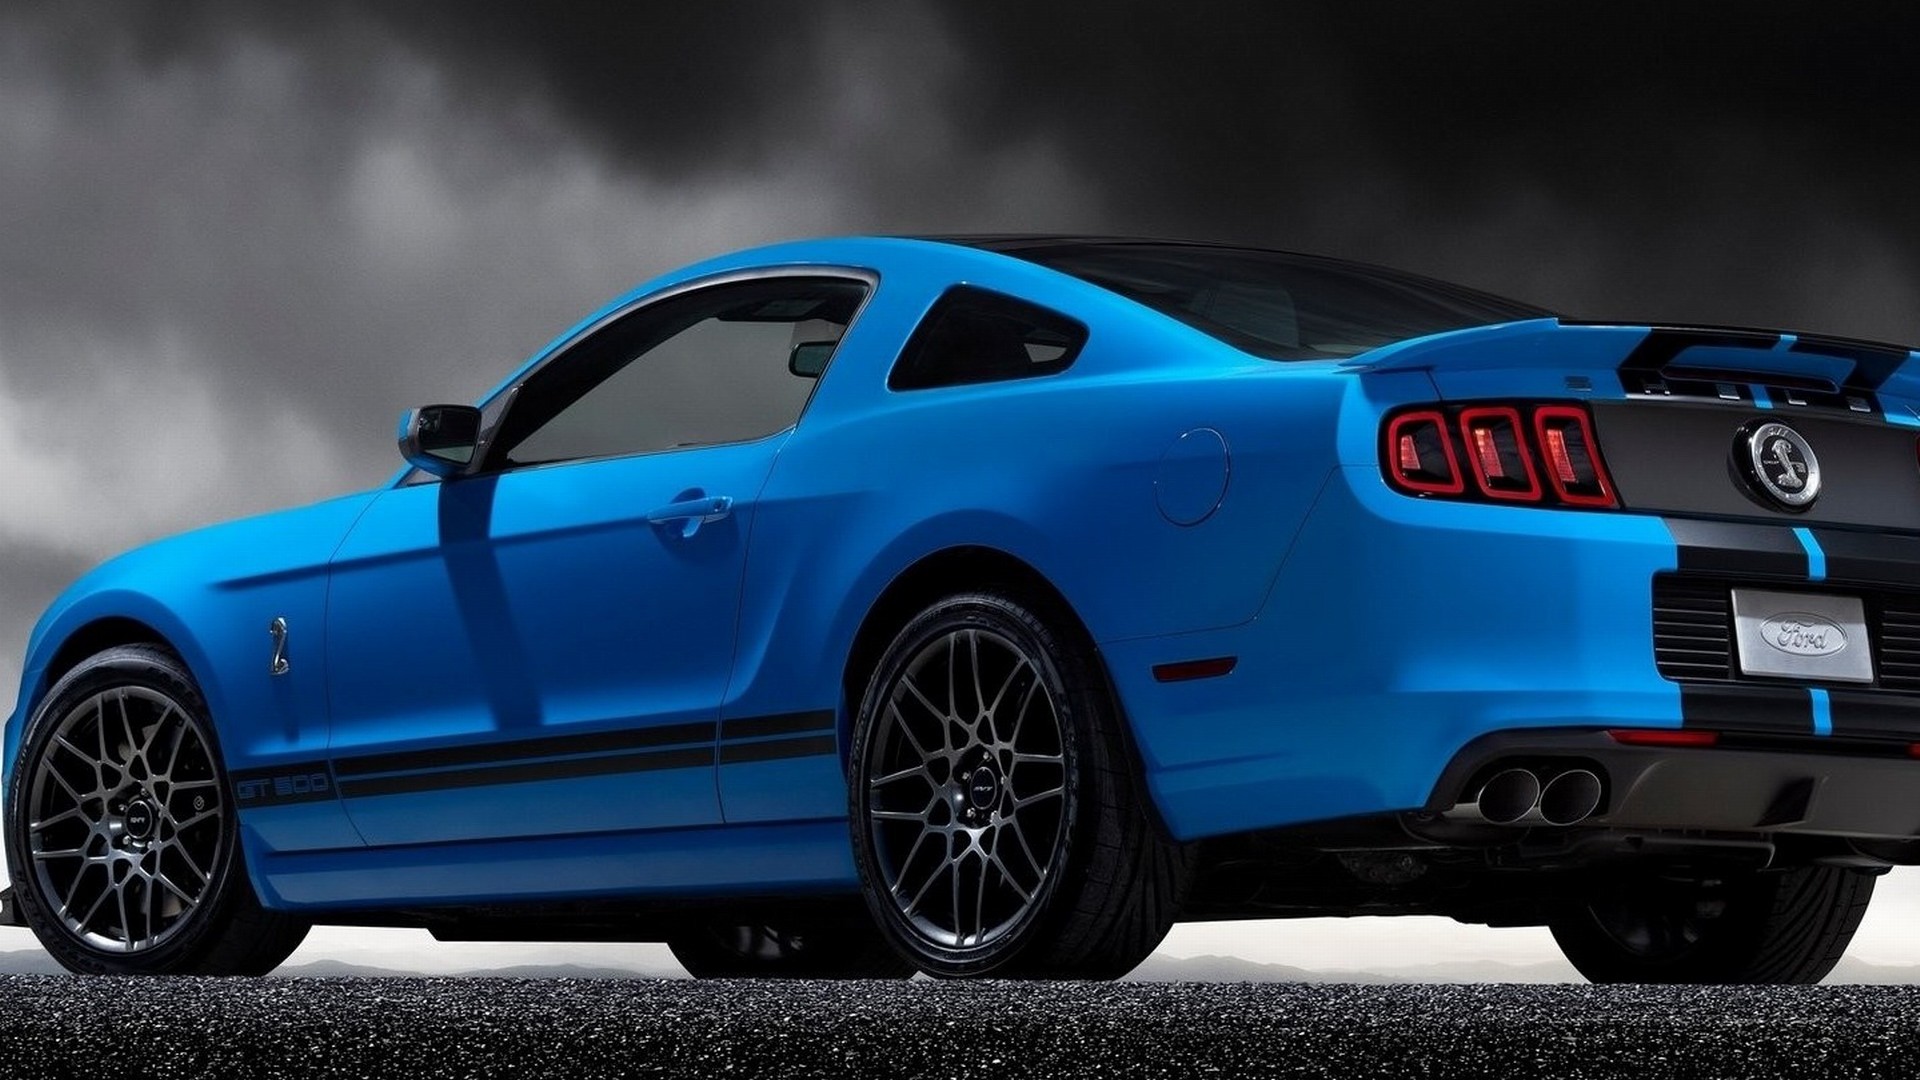 Mustang Shelby Gt500 Wallpaper Ford